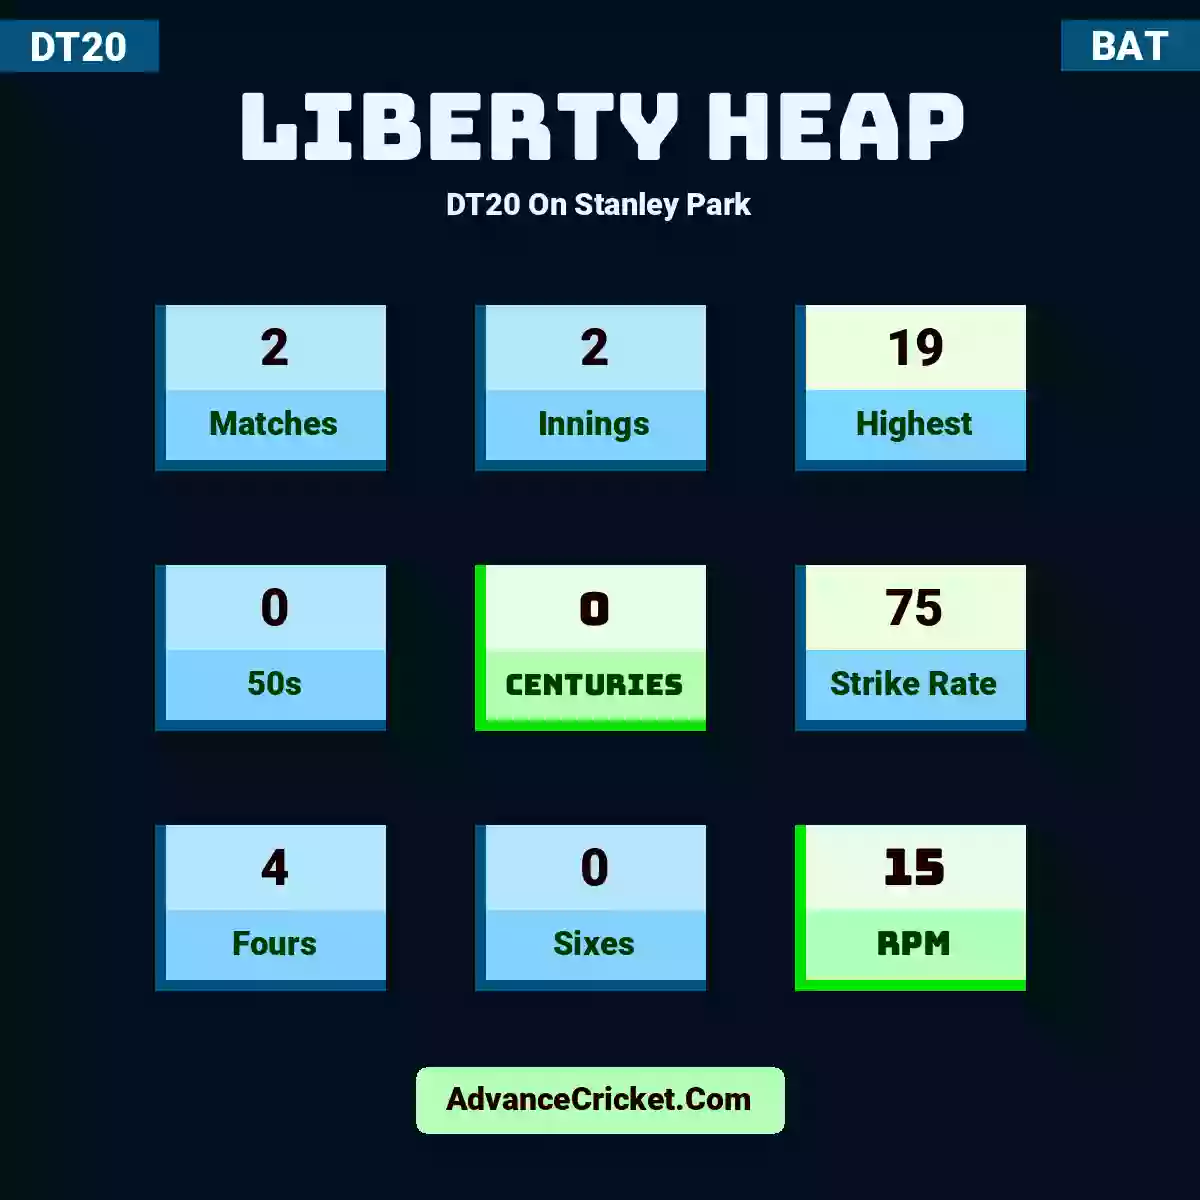 Liberty Heap DT20  On Stanley Park, Liberty Heap played 2 matches, scored 19 runs as highest, 0 half-centuries, and 0 centuries, with a strike rate of 75. L.Heap hit 4 fours and 0 sixes, with an RPM of 15.